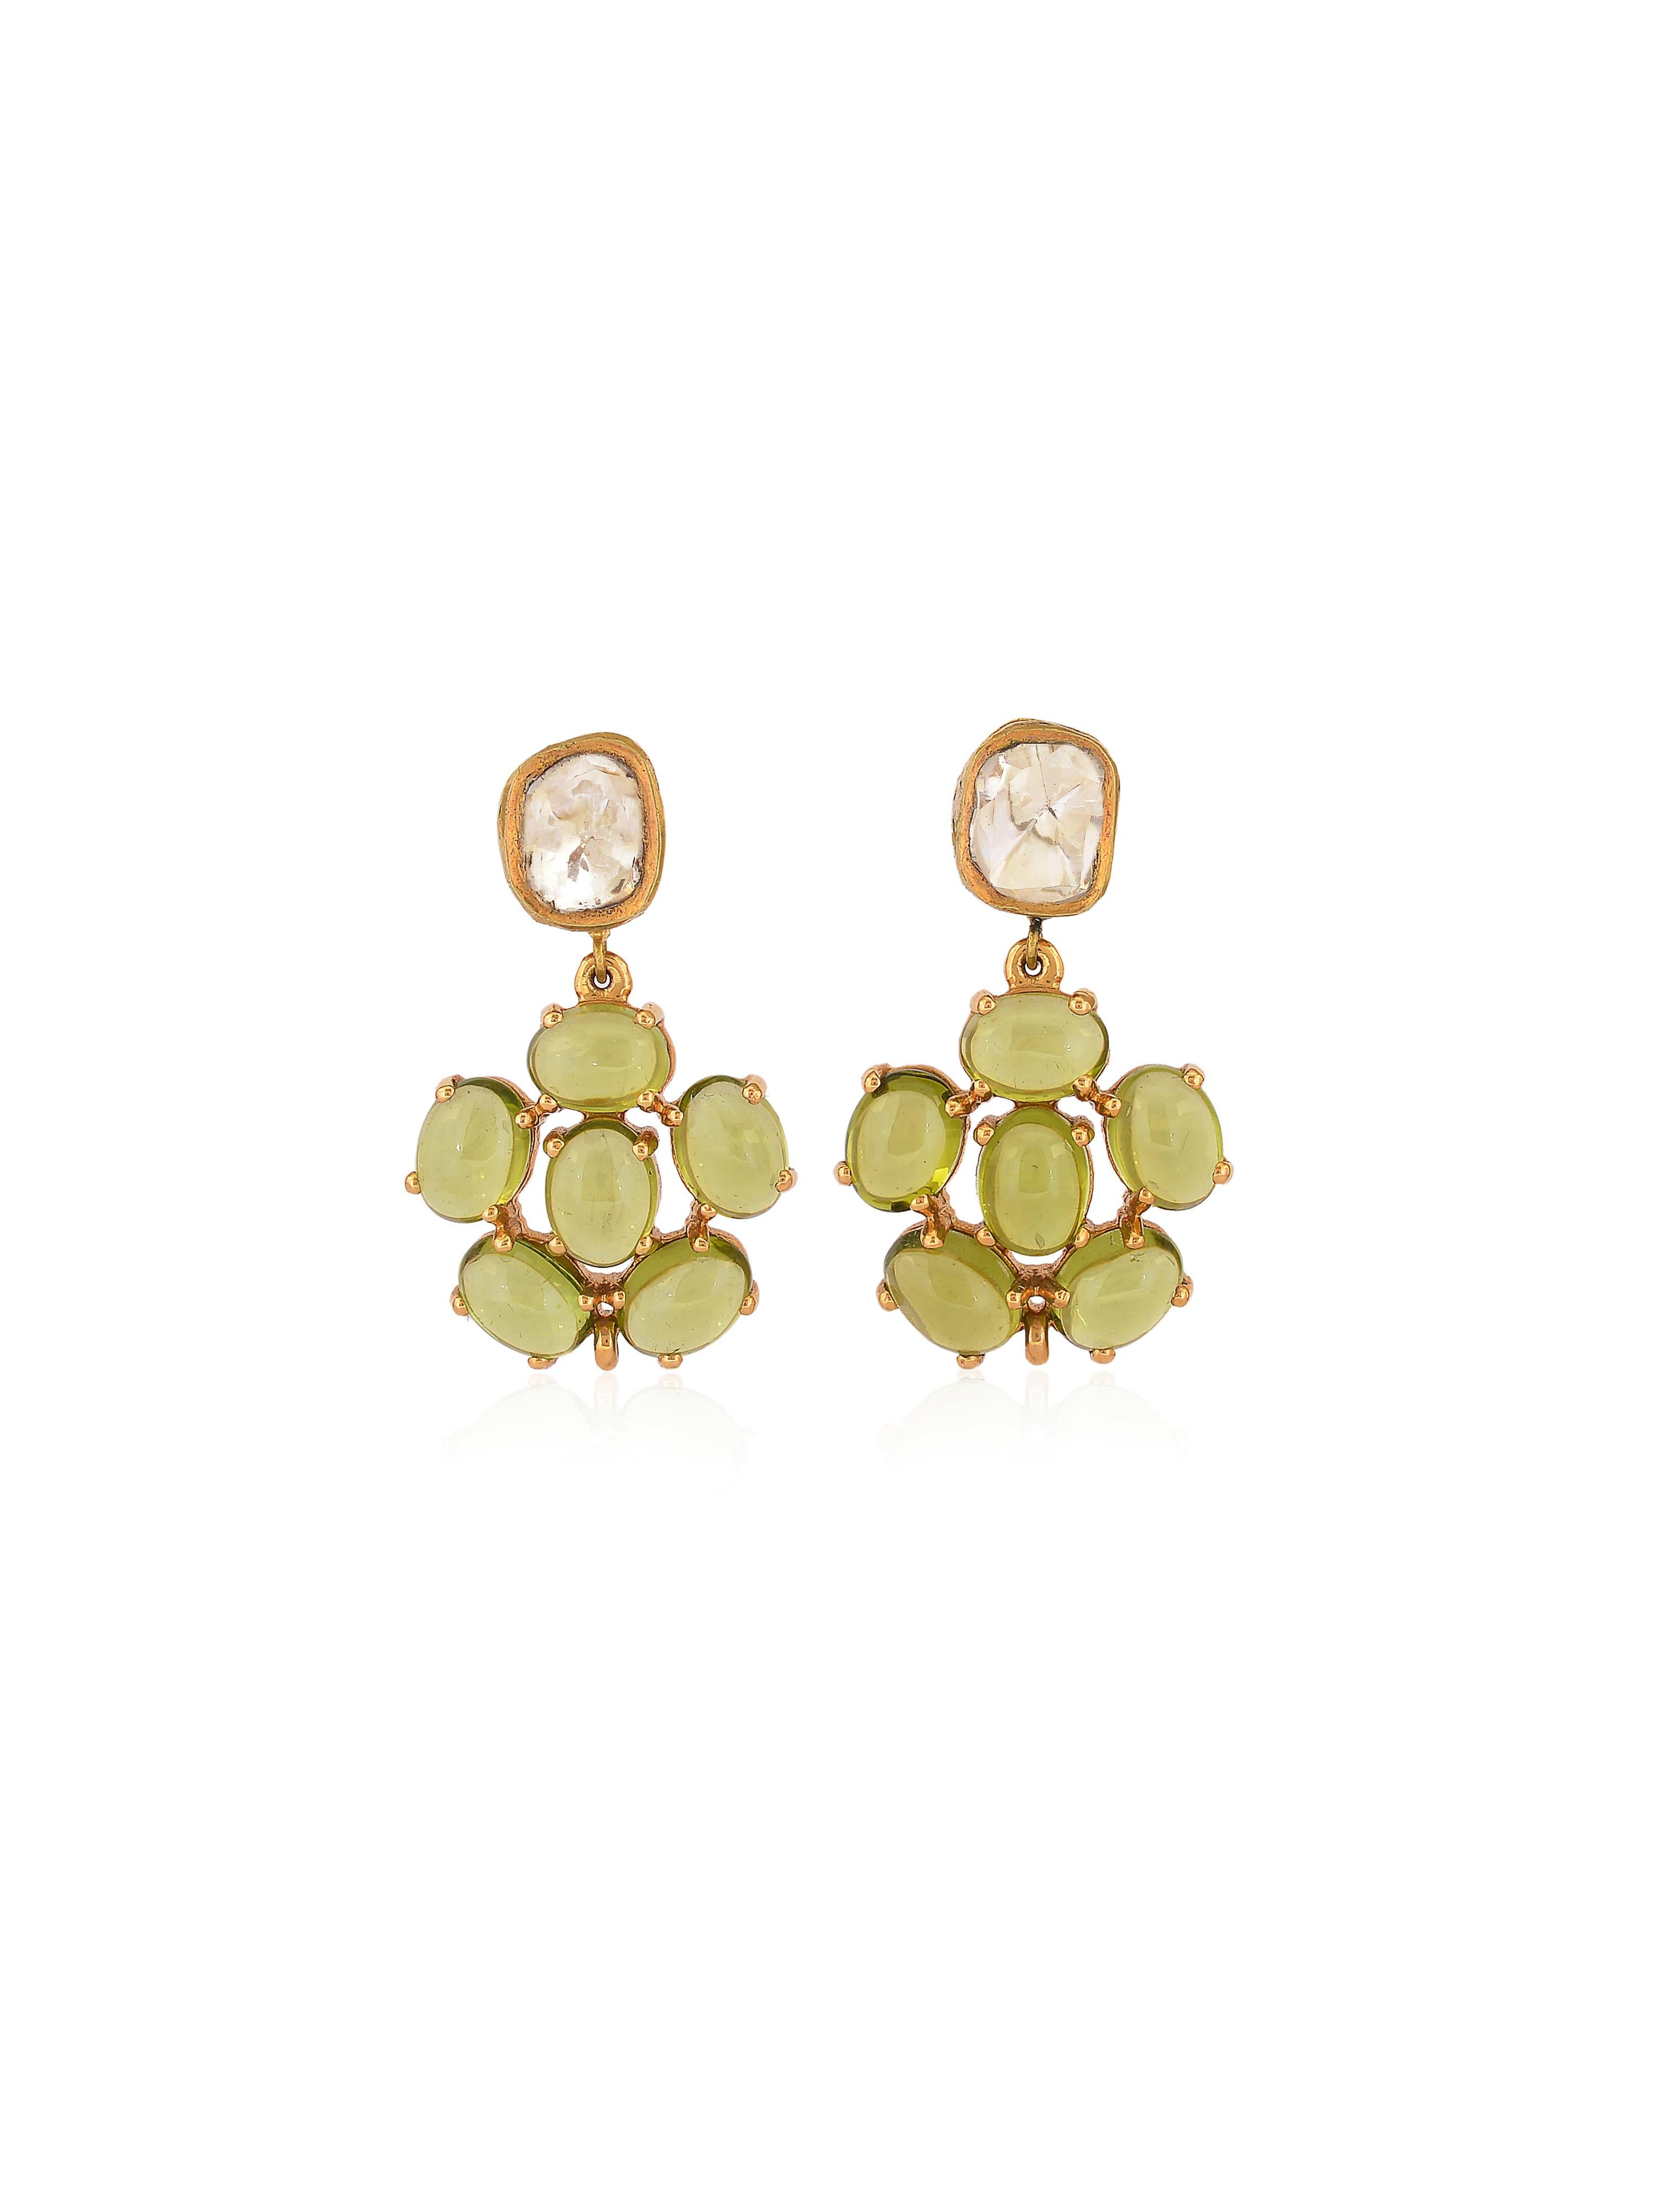 A pair of elegant pastel color peridot and uncut diamonds earrings, The clean peridots are kept hanging to make light pass through them as they look even prettier than they are. 
The top stud is a pair of uncut diamonds set in 18K gold by hand. The